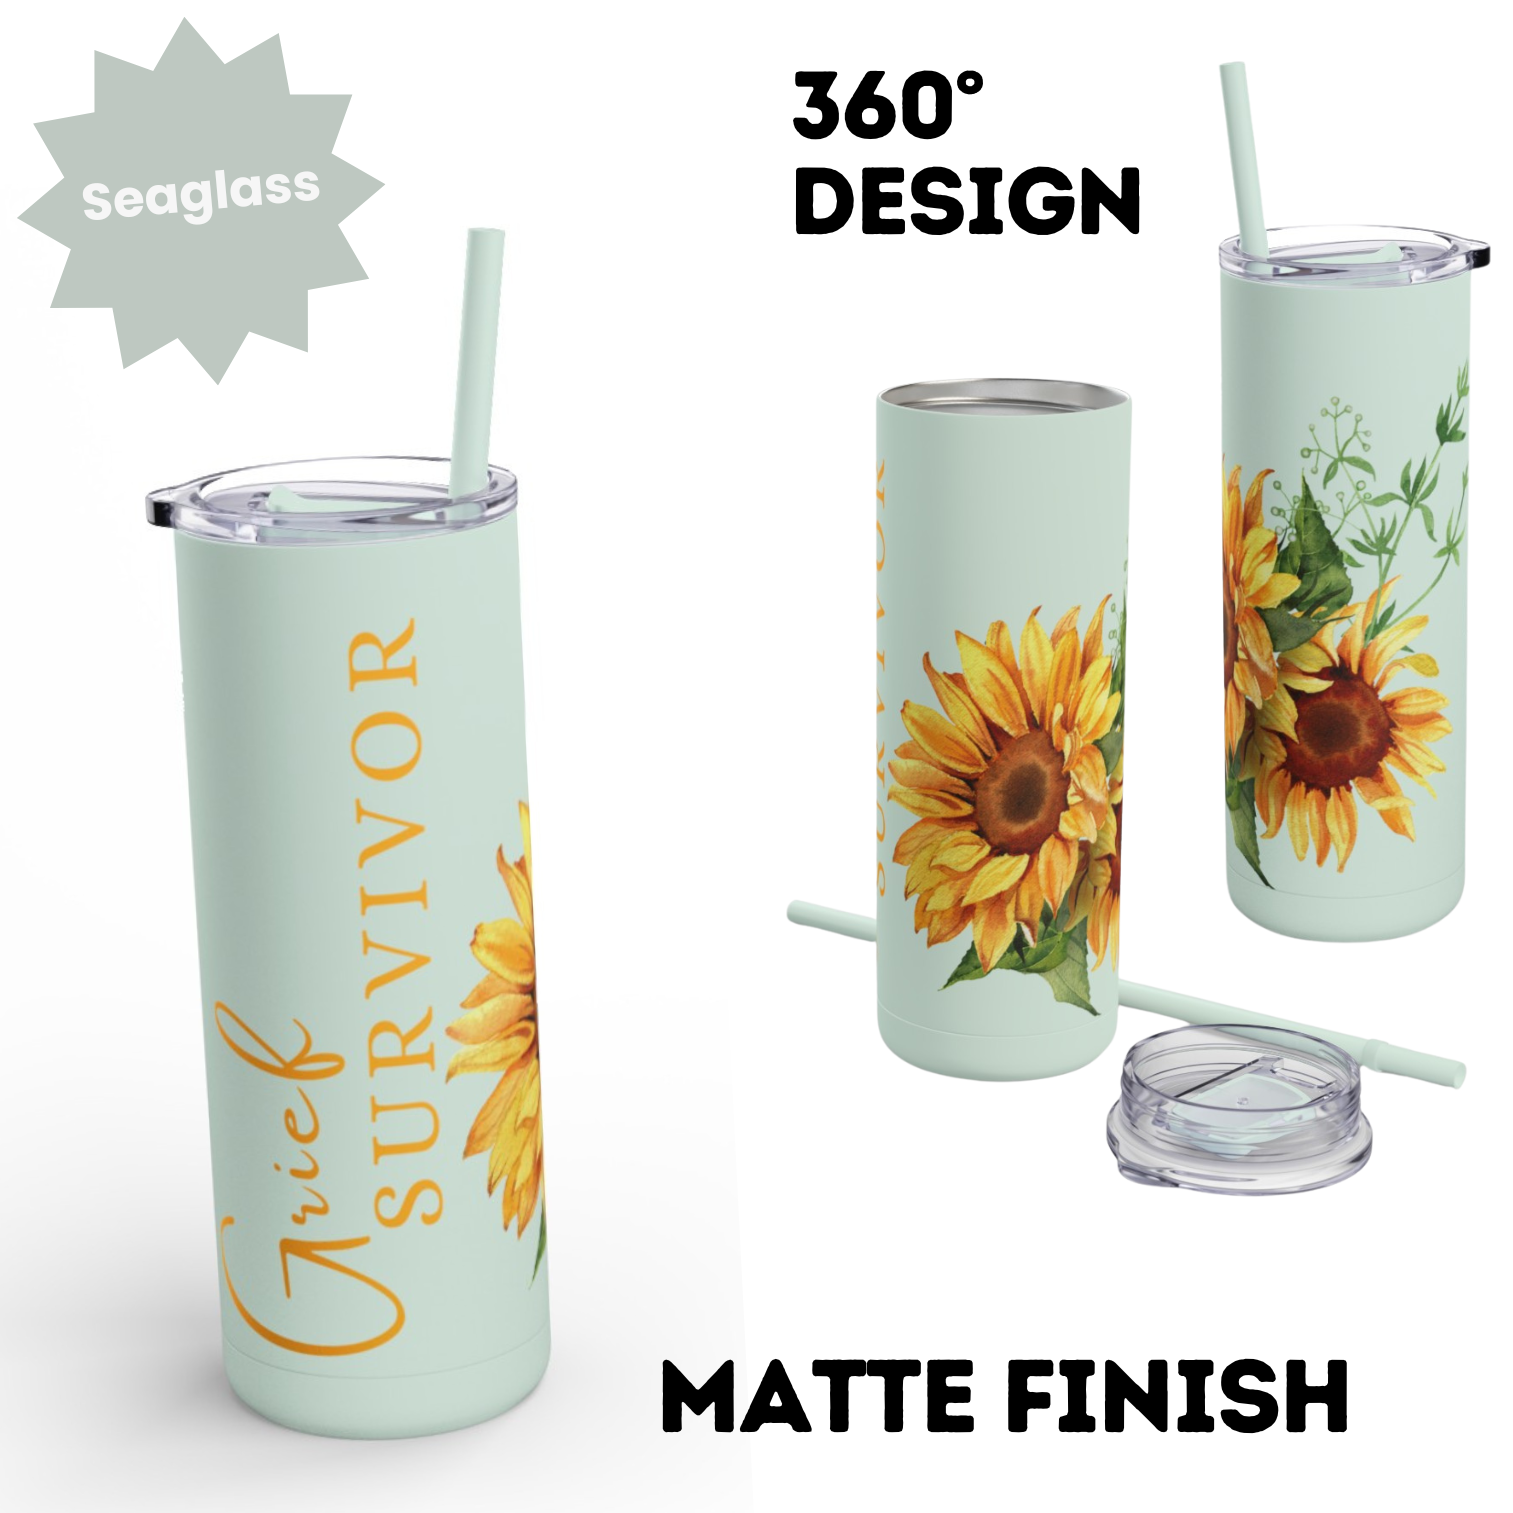 Seaglass Matte Tumbler sympathy gift for friend or family suffering the loss of a loved one. The Grief Survivor design with sunflower graphic reflects their painful journey through the lense of a survivor.  